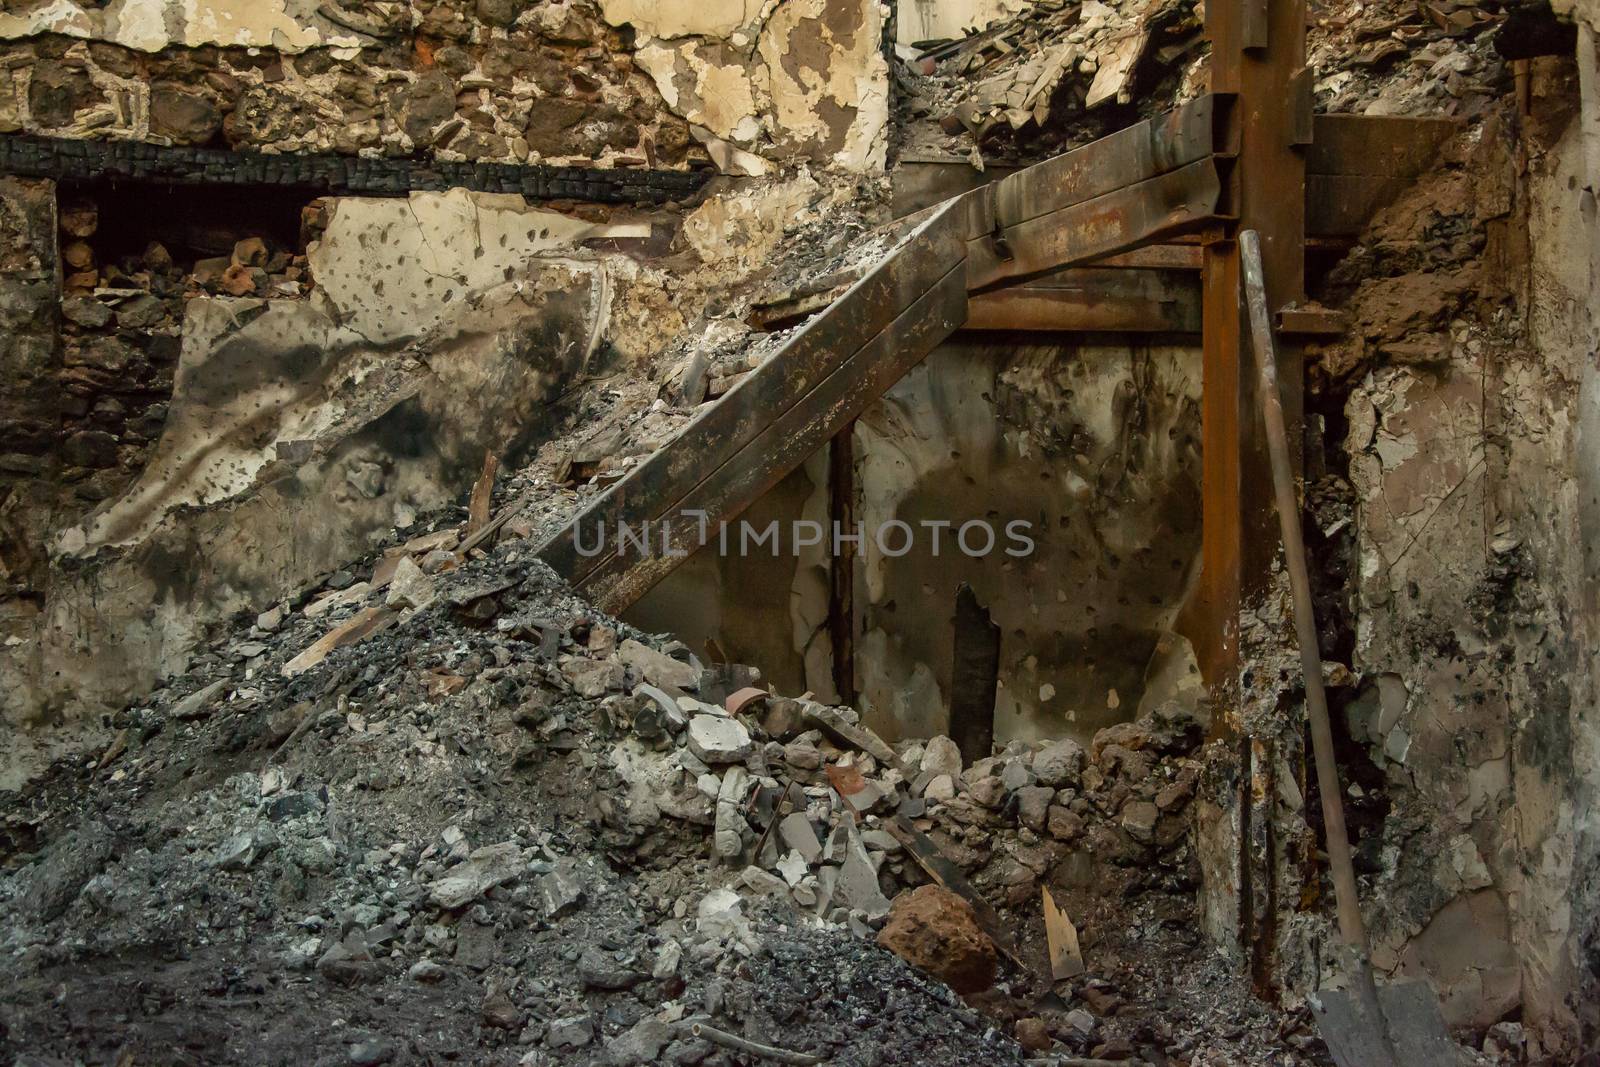 Ruins of burned ancient historical 2 floors house after fire disaster accident in old town of Antalya Kaleici Turkey. Stock image of heaps of ash and arson, collapsed roof and broken windows.